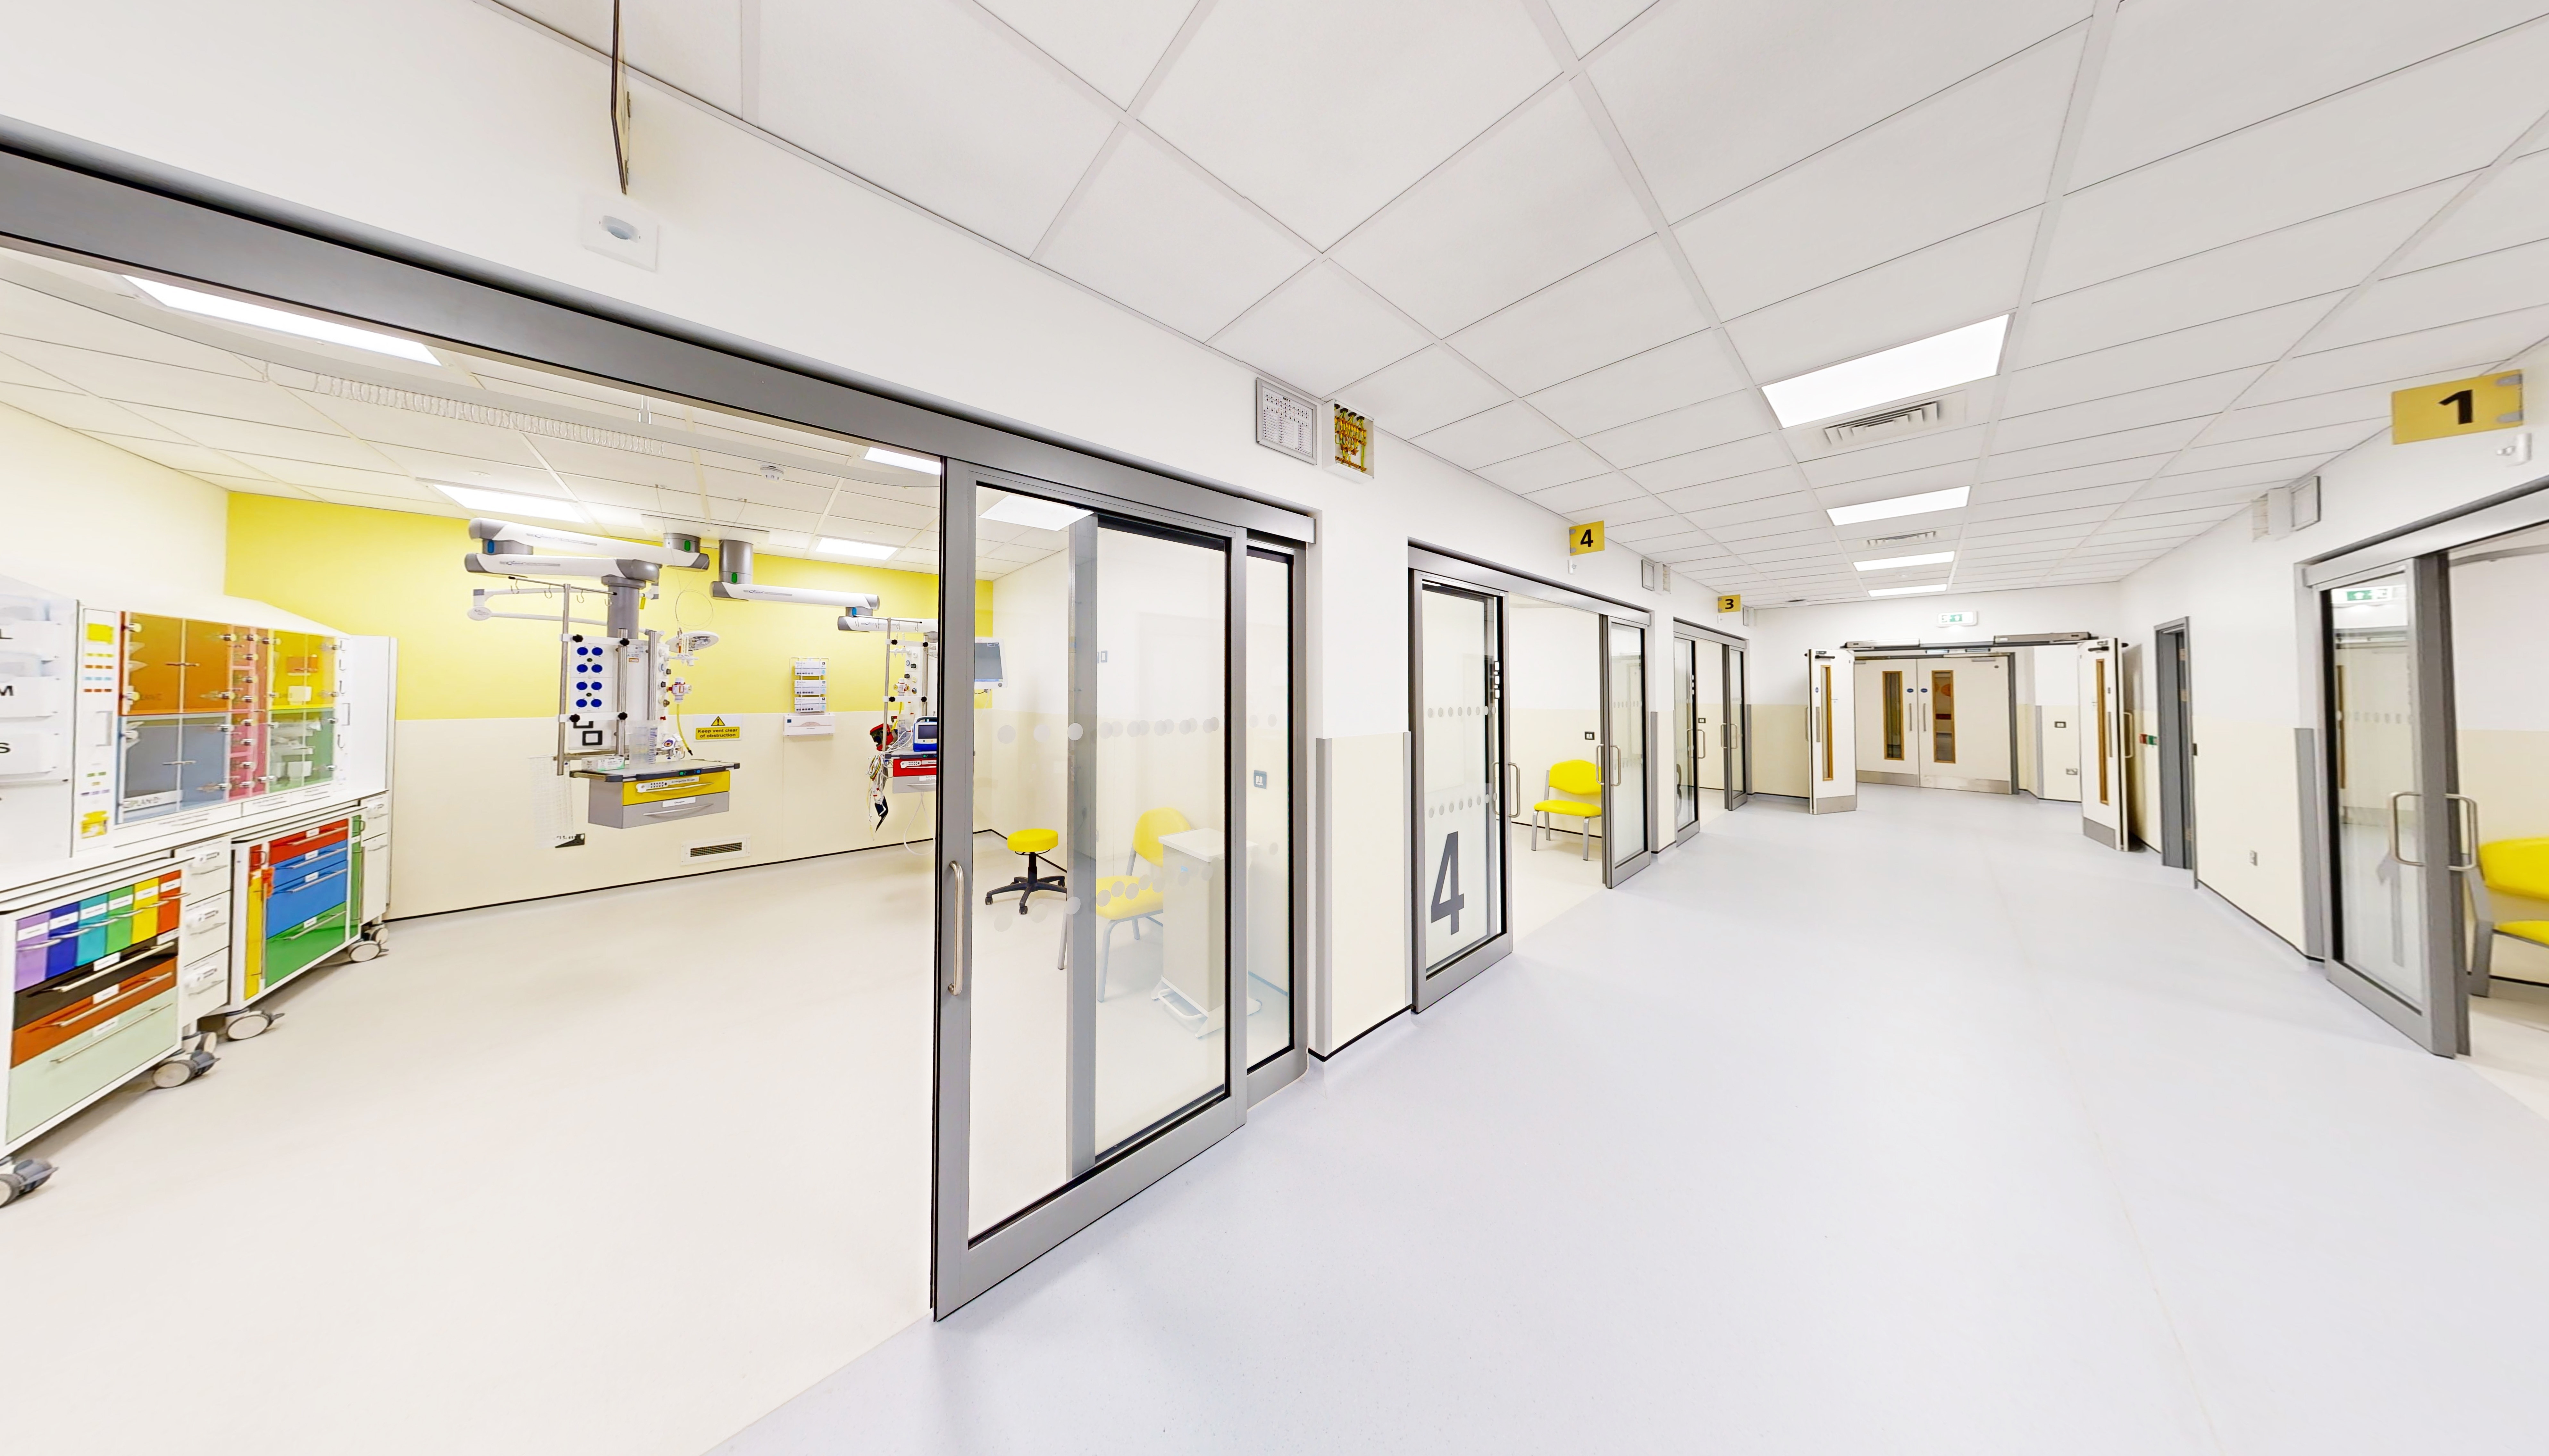 The new resuscitation area at the QEQM. Image shows a corridor with rooms off it with sliding doors